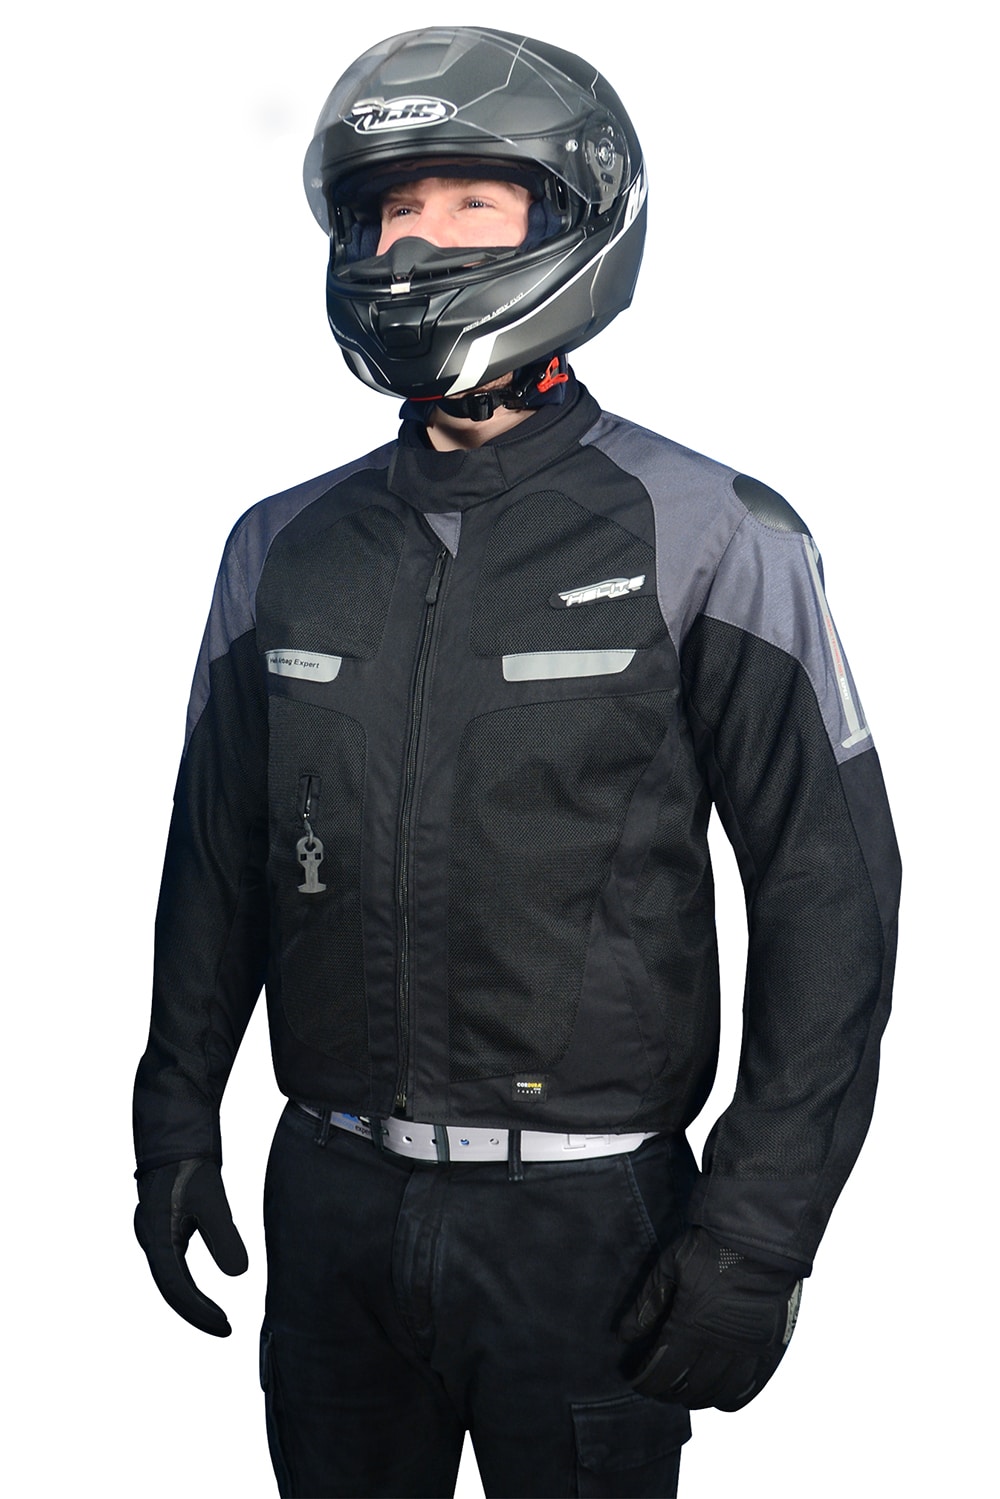 biker being safe by wearing the vented motorcycle jacket